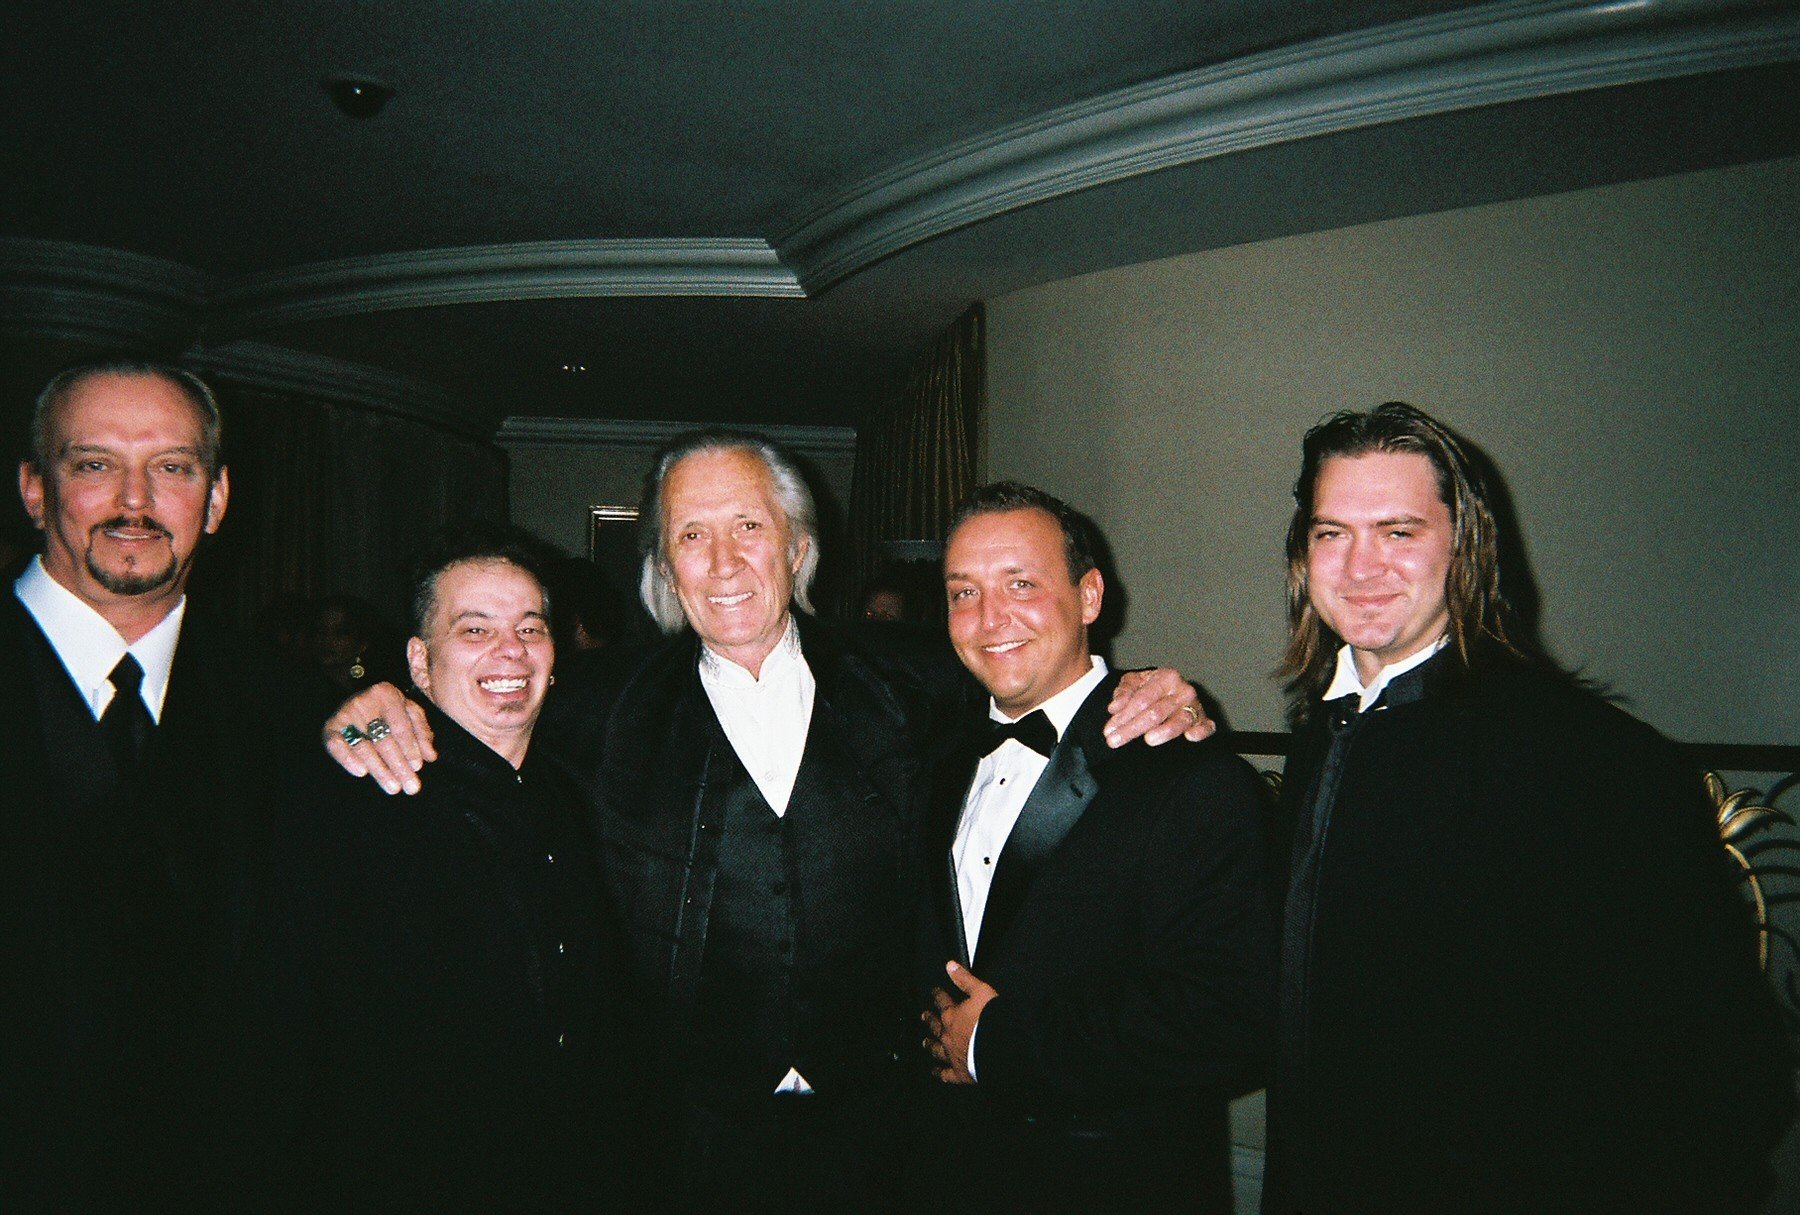 The Cat Pack - From left, actor Anthony Hornus (Ghost Town, An Ordinary Killer), Joe Murphy of Big Cat Entertainment (Super Model Showdown), actor David Carradine (Kung Fu, Kill Bill: Vols. 1 and 2), actor David Borowicz (An Ordinary Killer, Tangy Guacamo